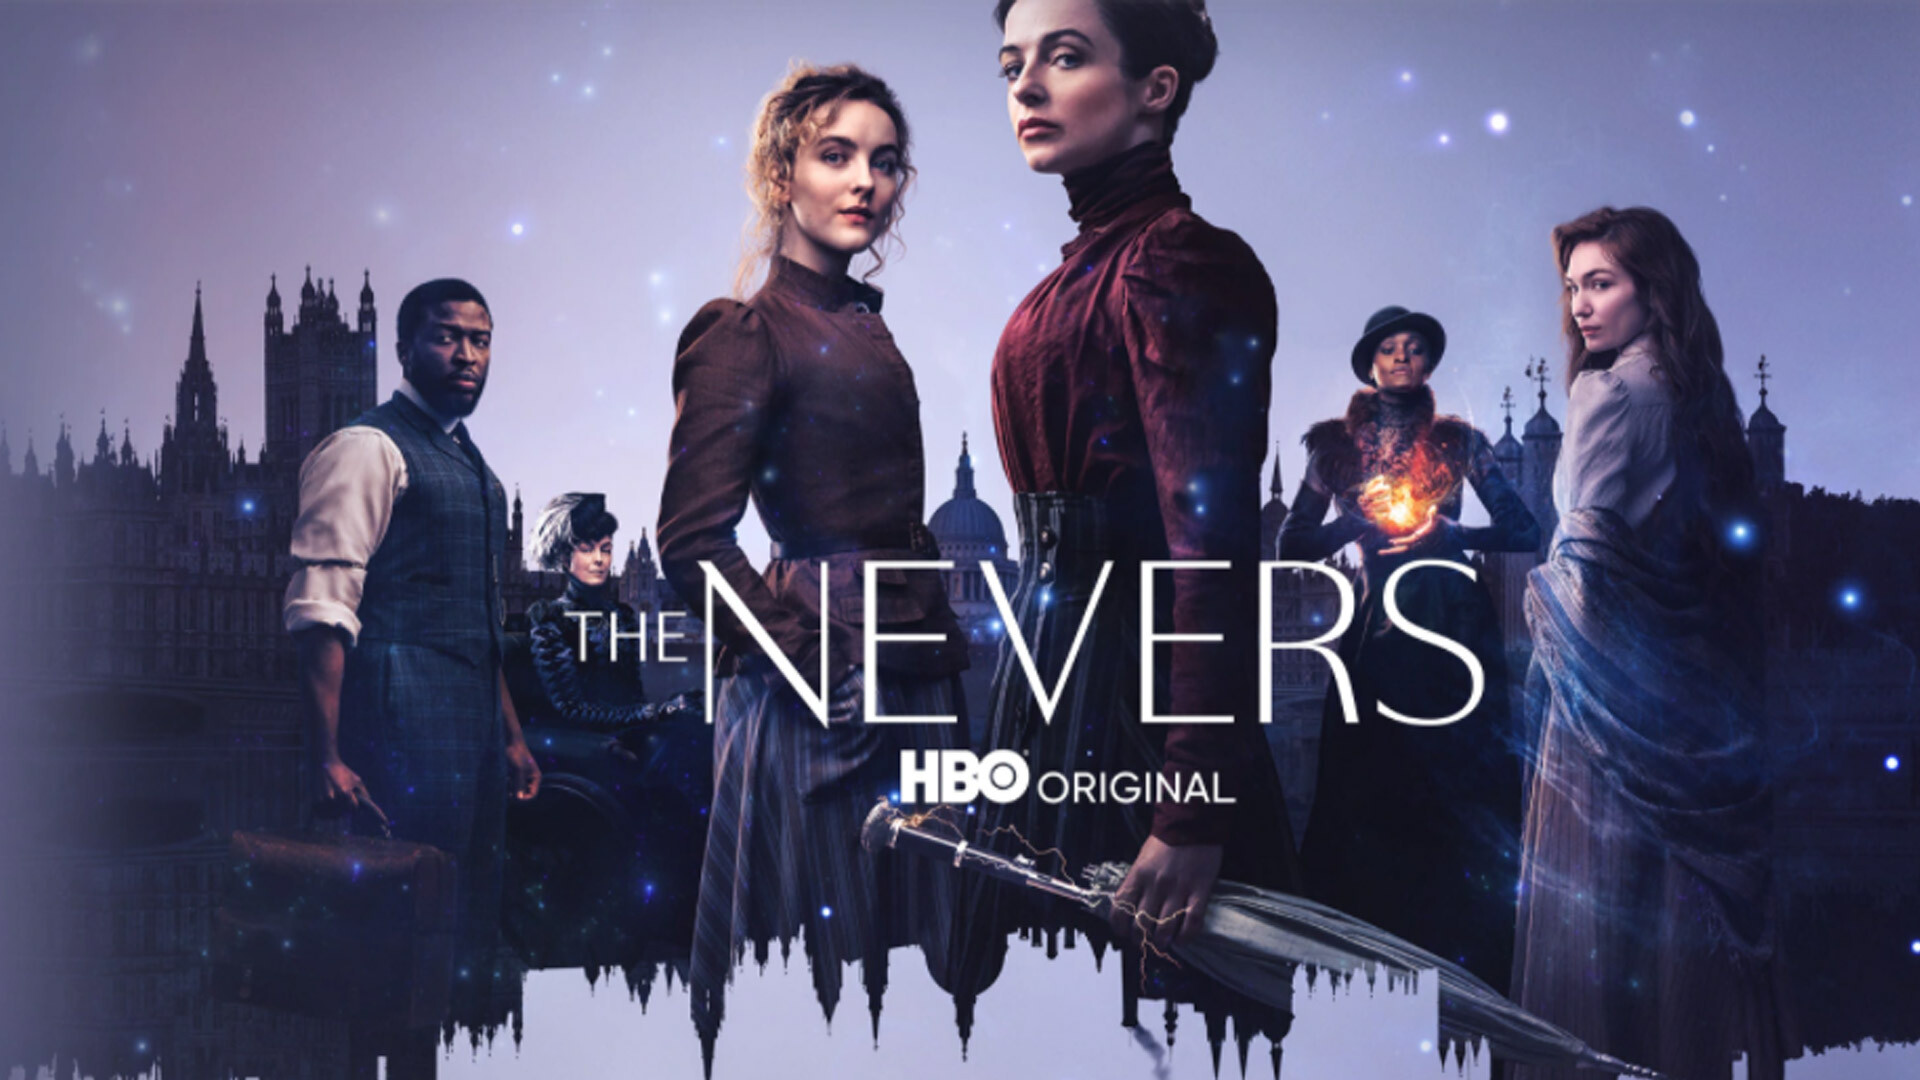 The Nevers: HBO original series, Laura Donnelly was the first actress to join the series in April 2019. 1920x1080 Full HD Background.